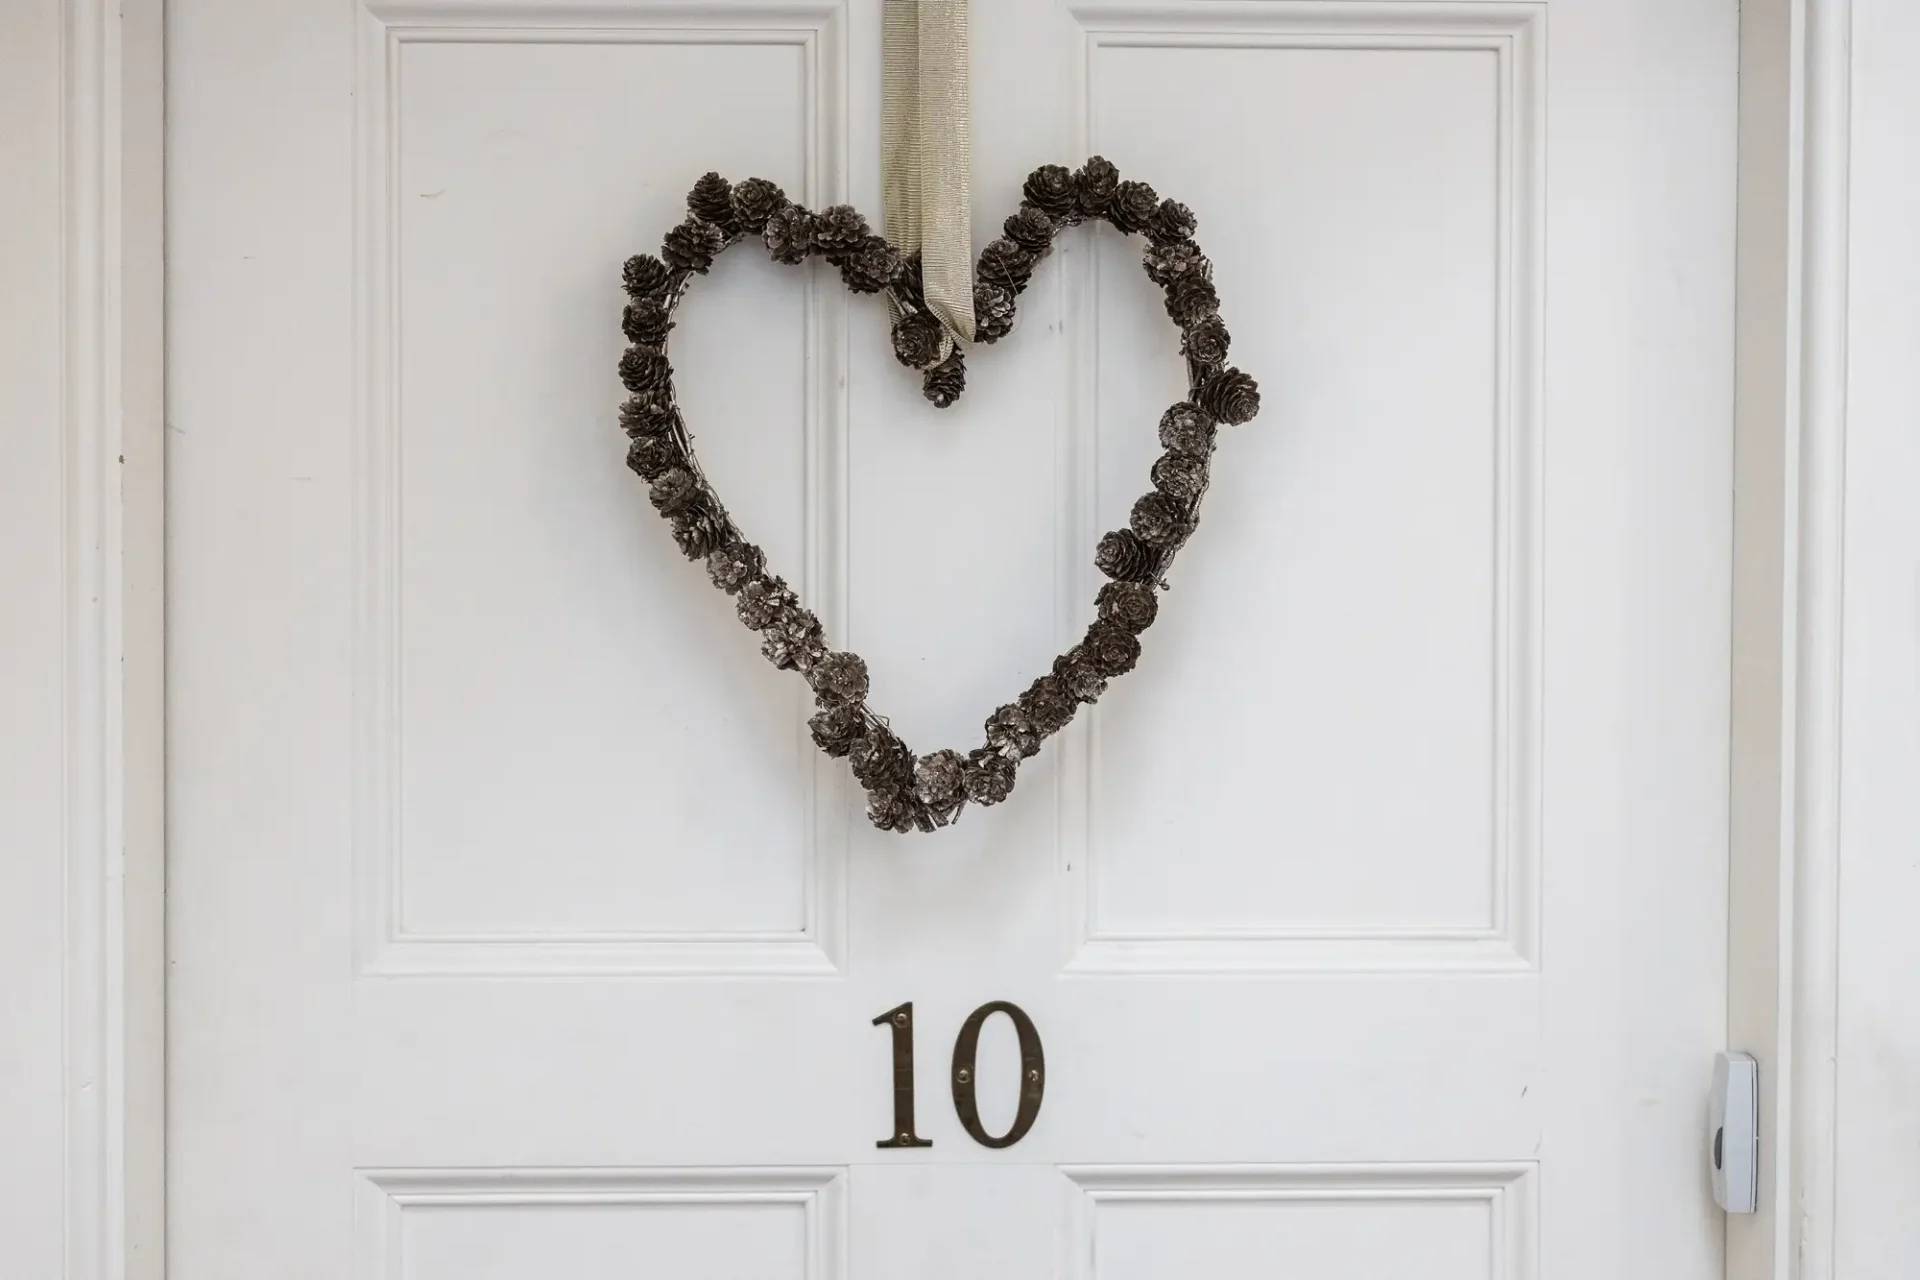 A heart-shaped wreath made of pine cones hangs on a white door with the number 10.